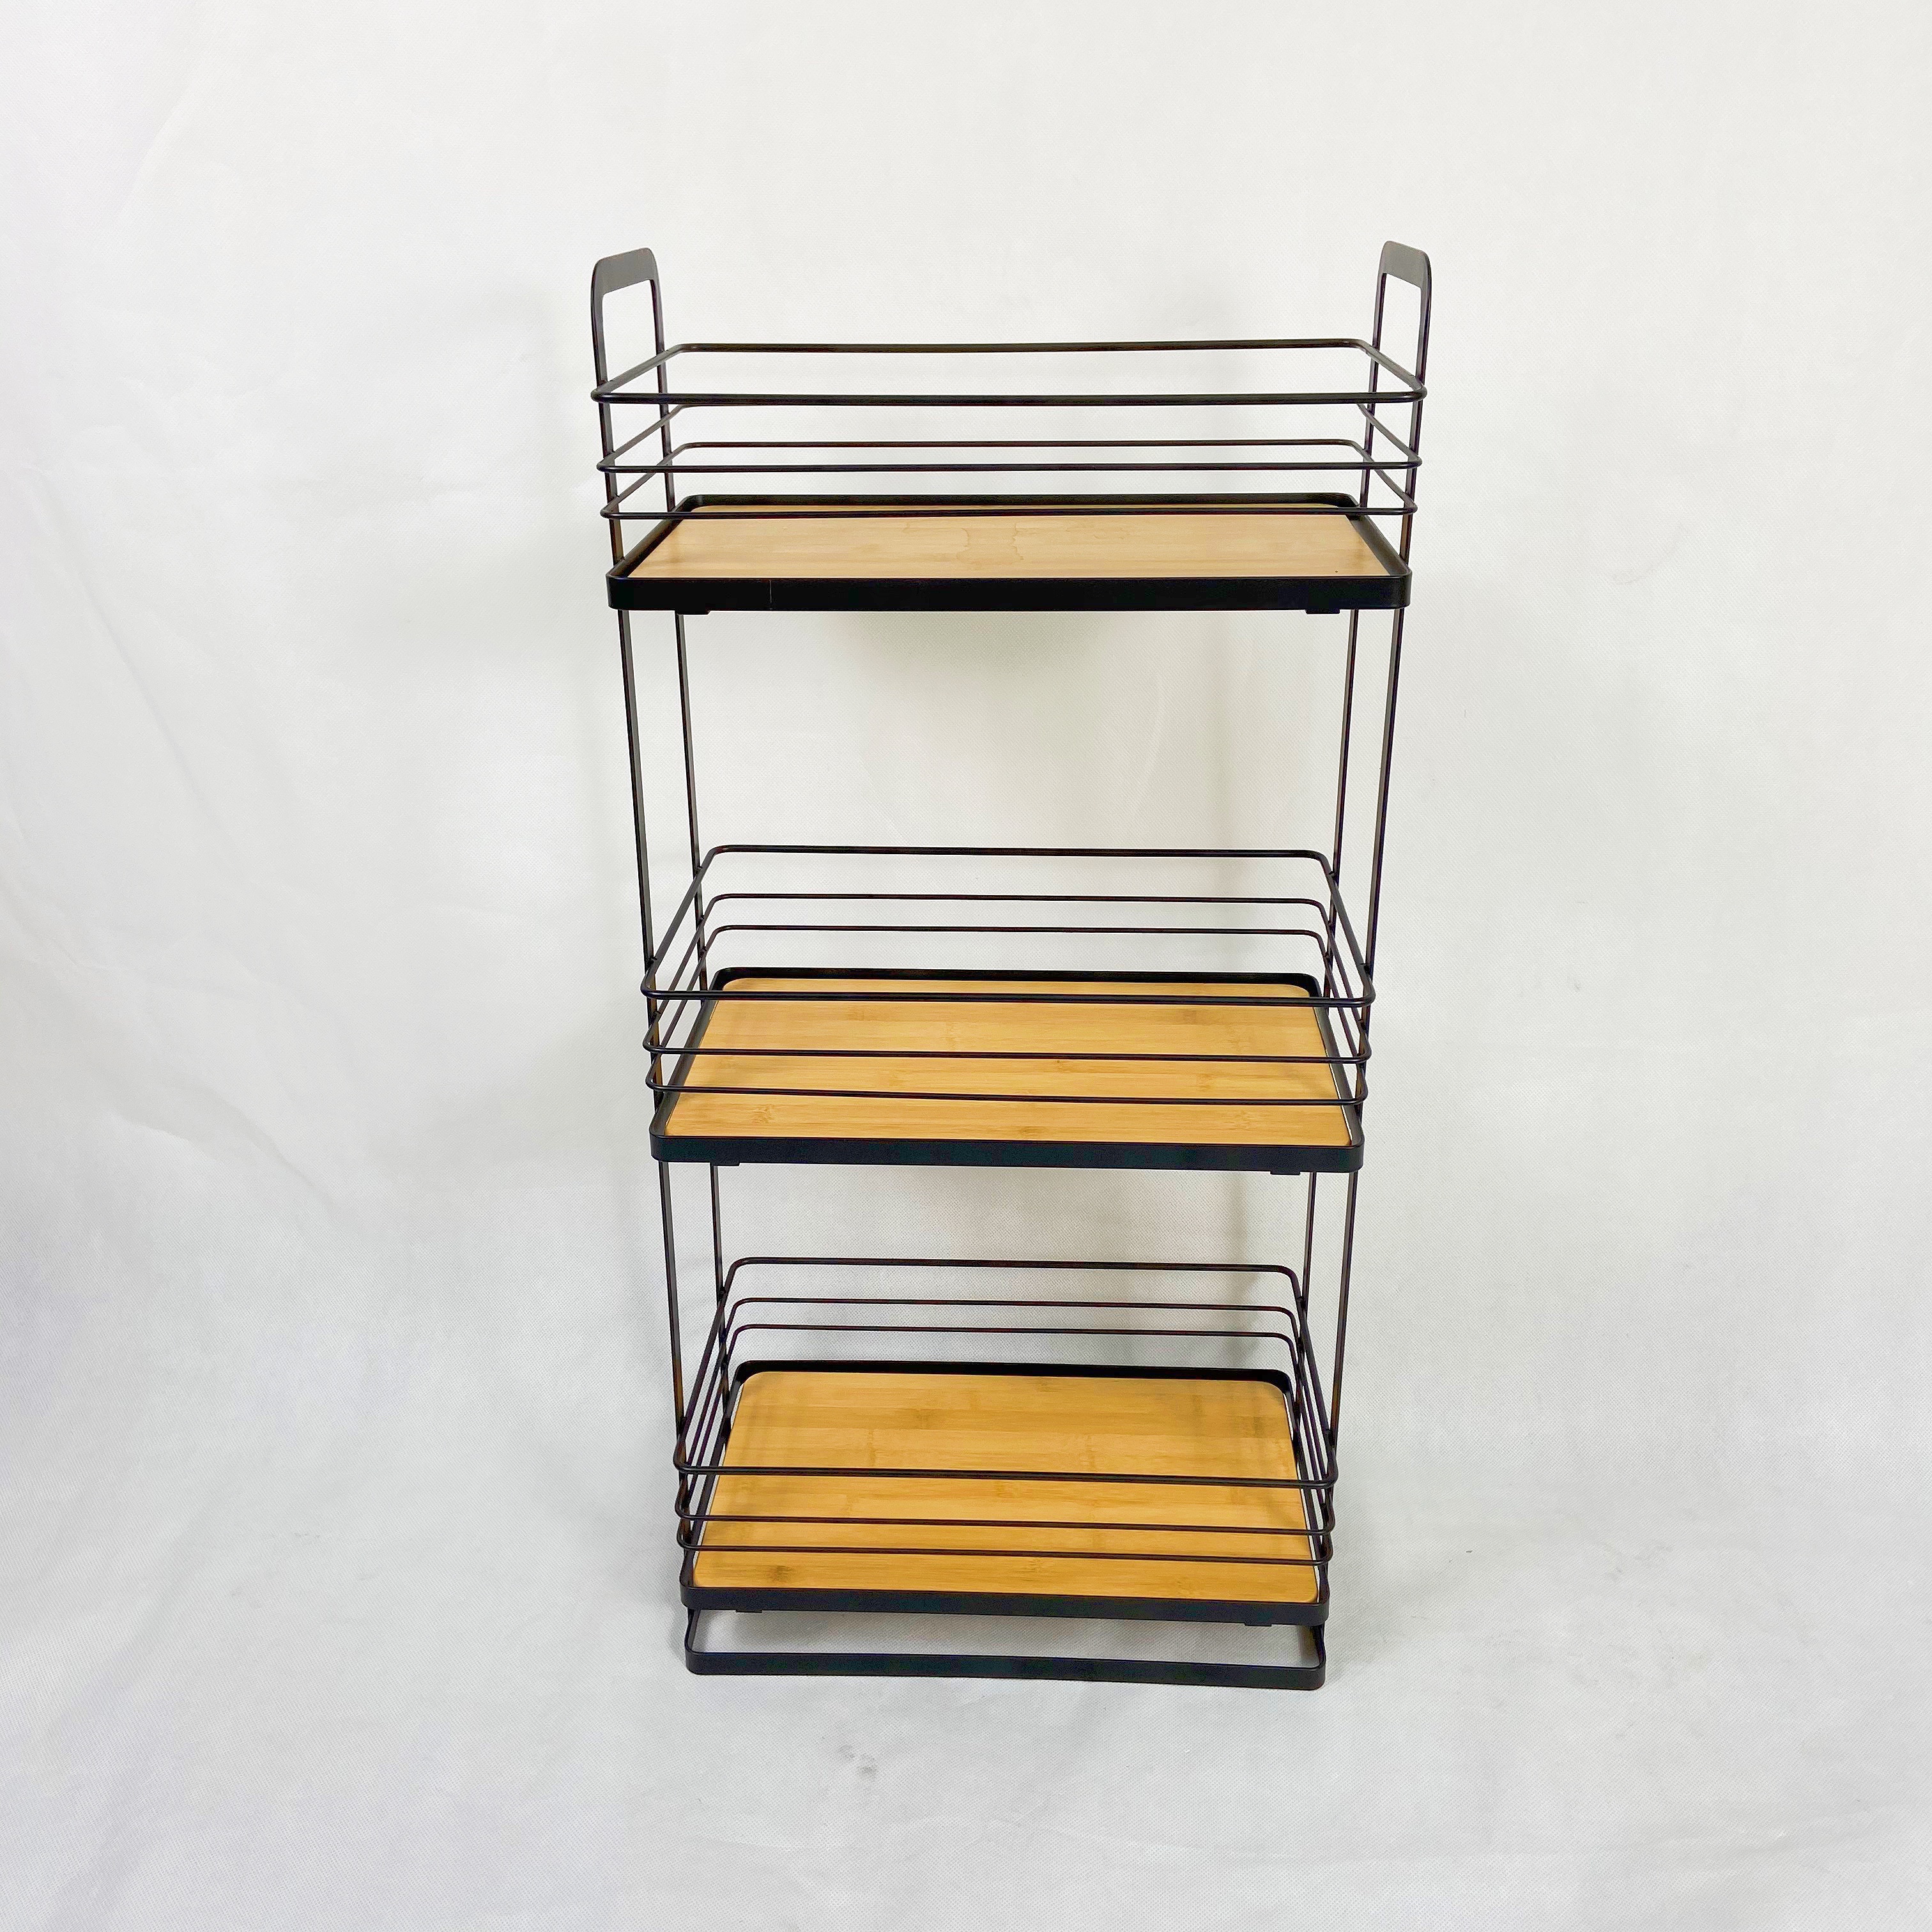 3 Tier Storage Caddy Featured Image